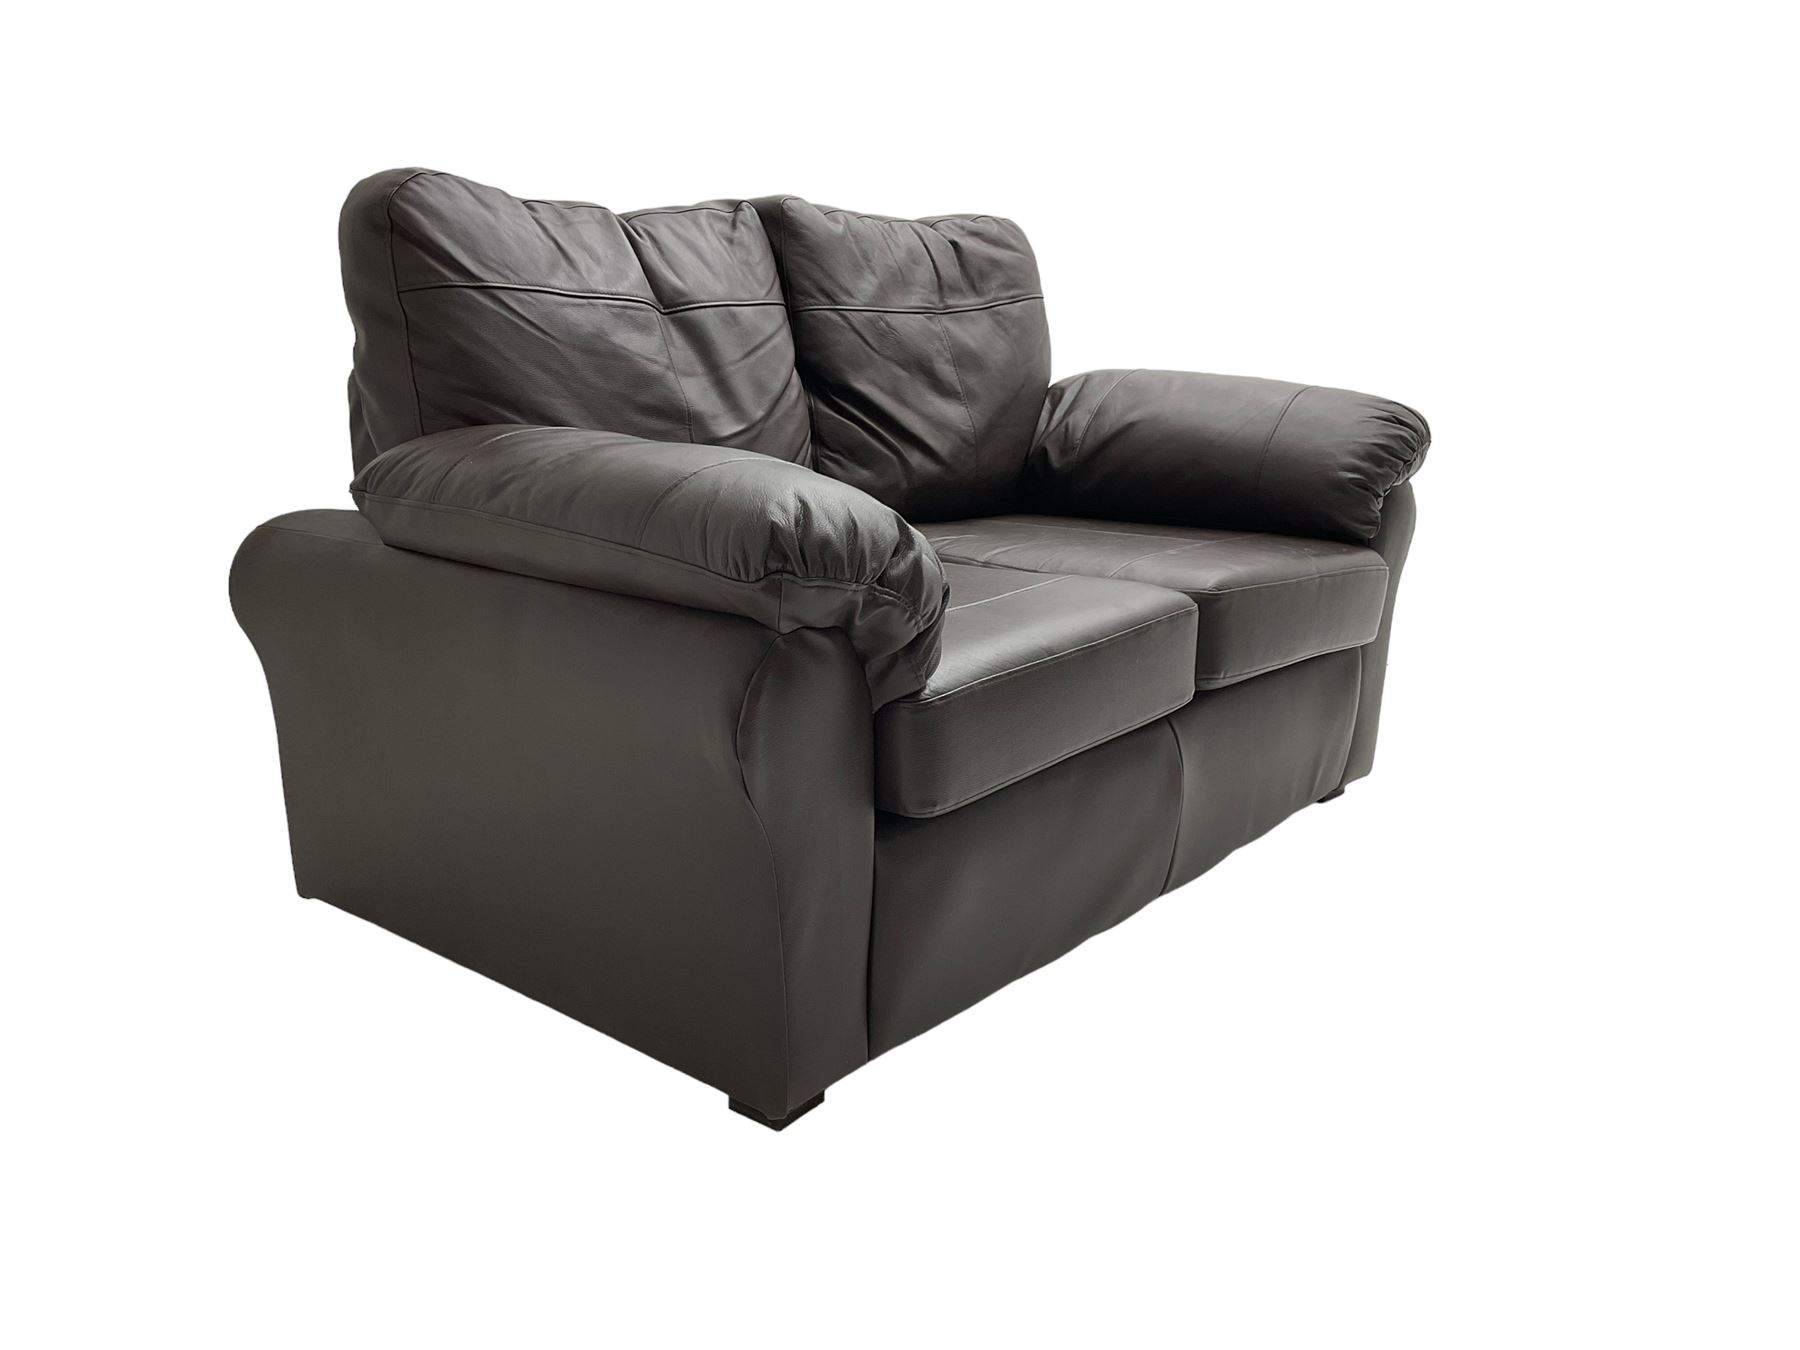 Two seat sofa - Image 7 of 7